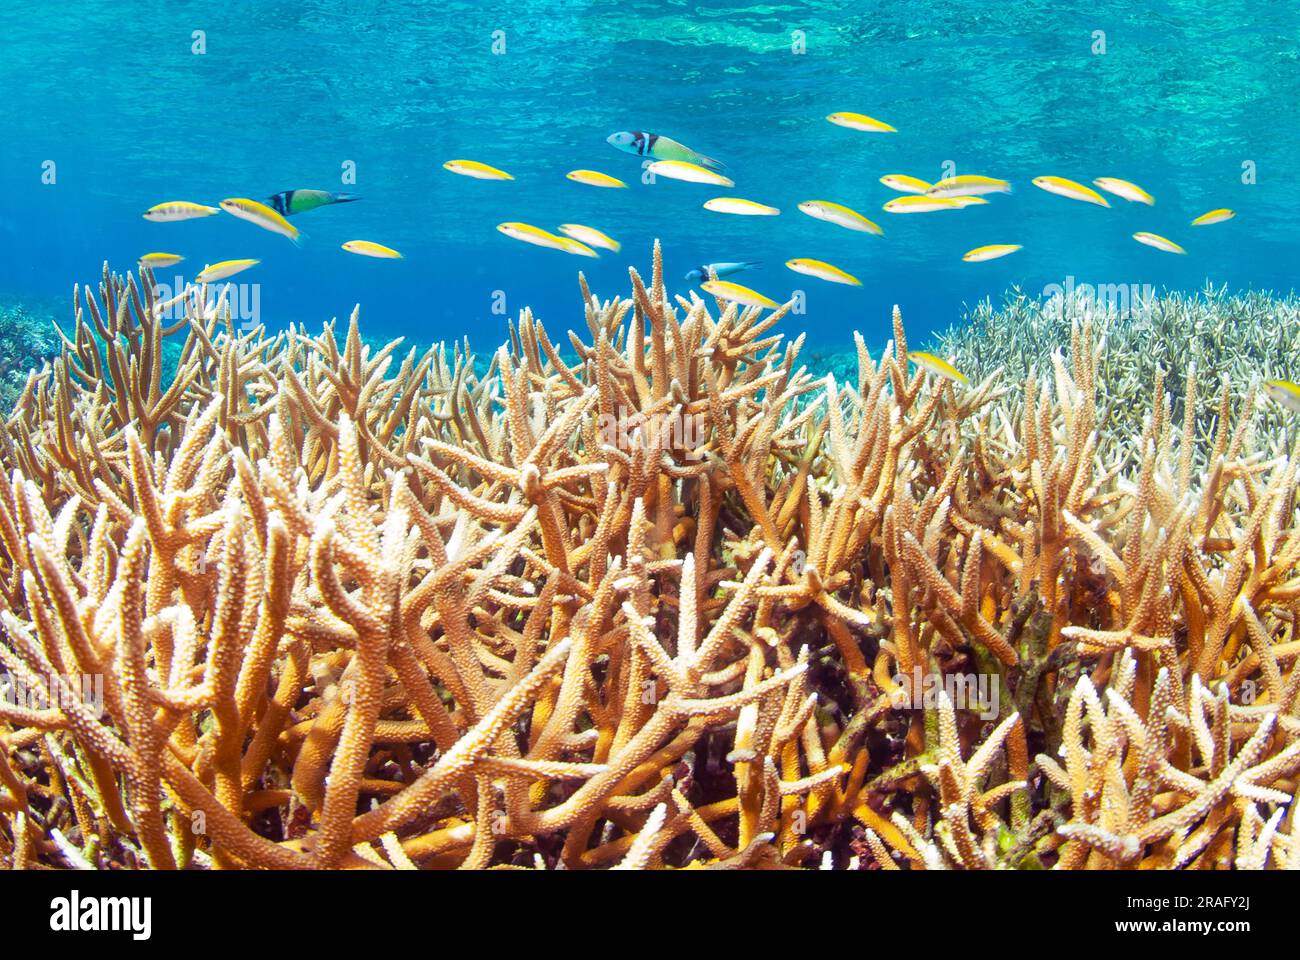 Fish swimming over  Staghorn coral (Acropora cervicornis) Stock Photo